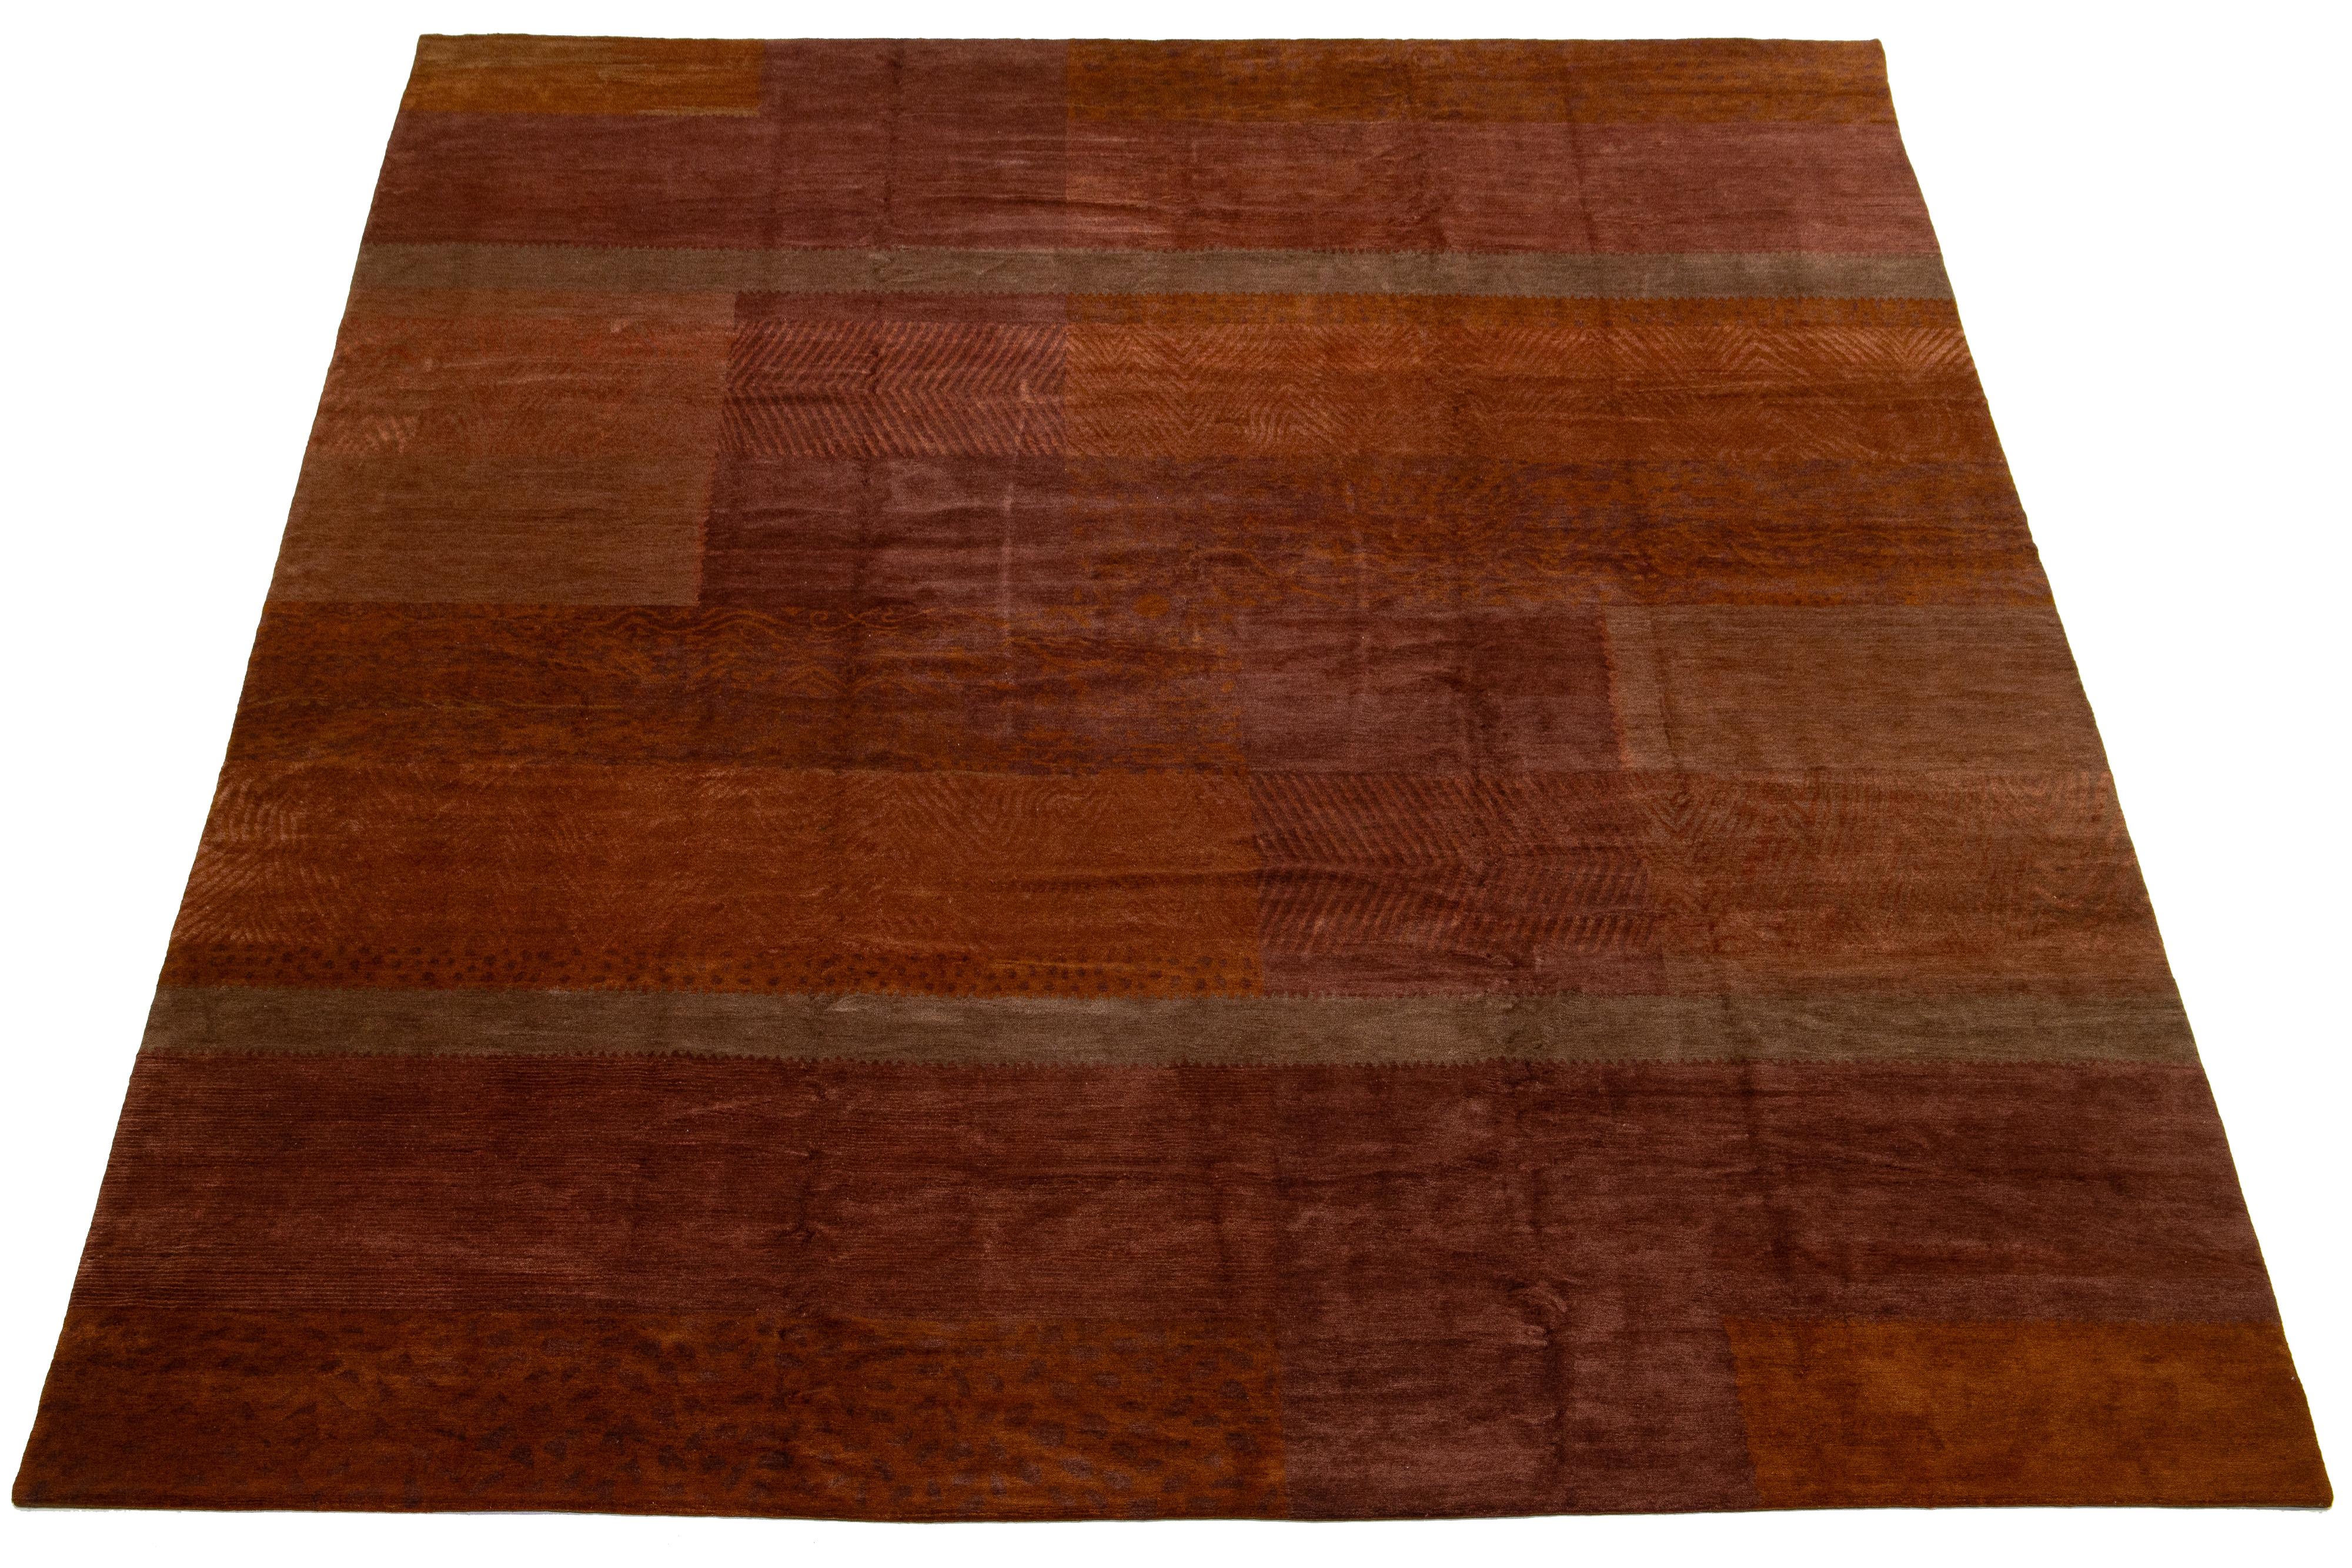 This modern Tibetan rug has a rust-colored field with orange and brown accents, creating a chic and sophisticated overall geometric design that reflects the essence of modernism in the 21st century.

This rug measures 13'5